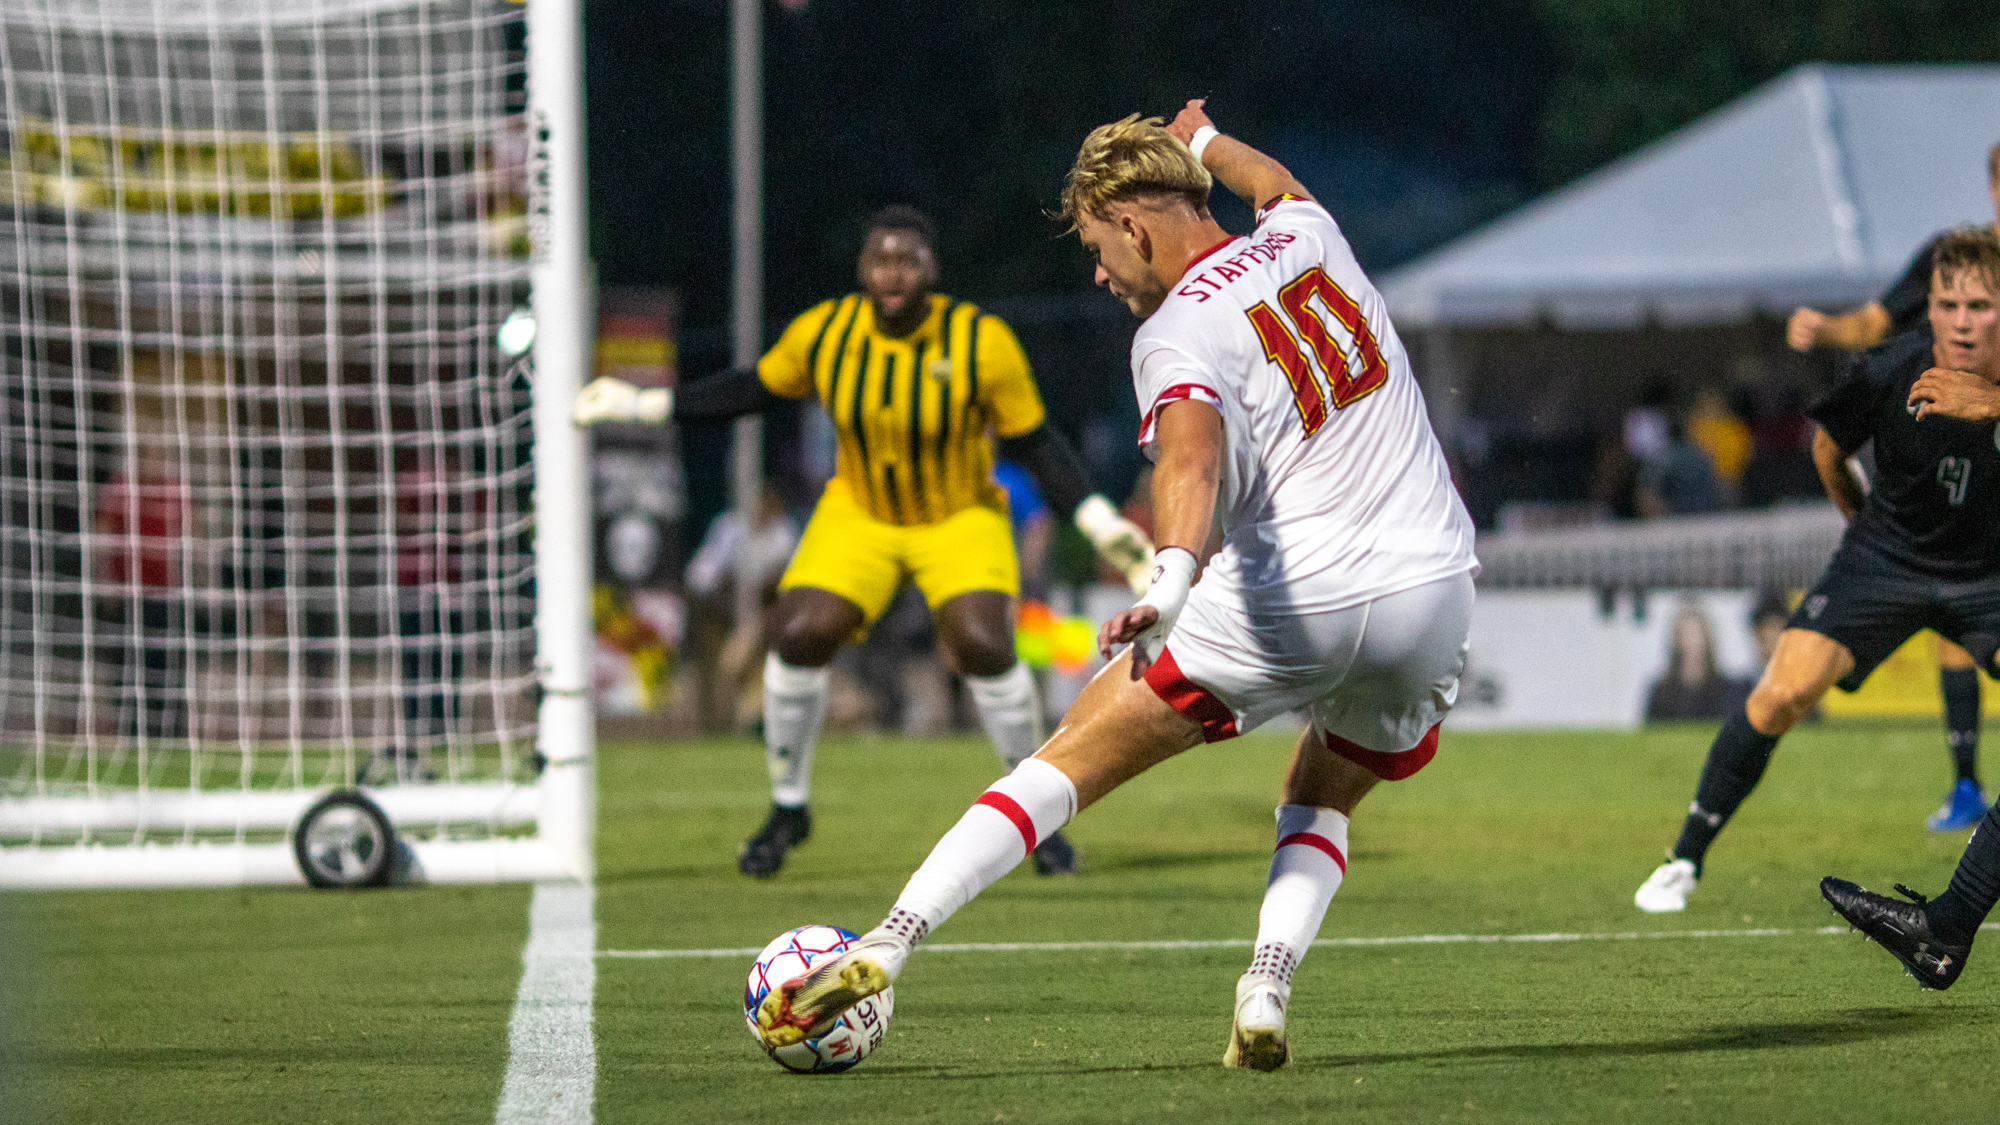 Caden Stafford thrived in his first two appearances for Maryland